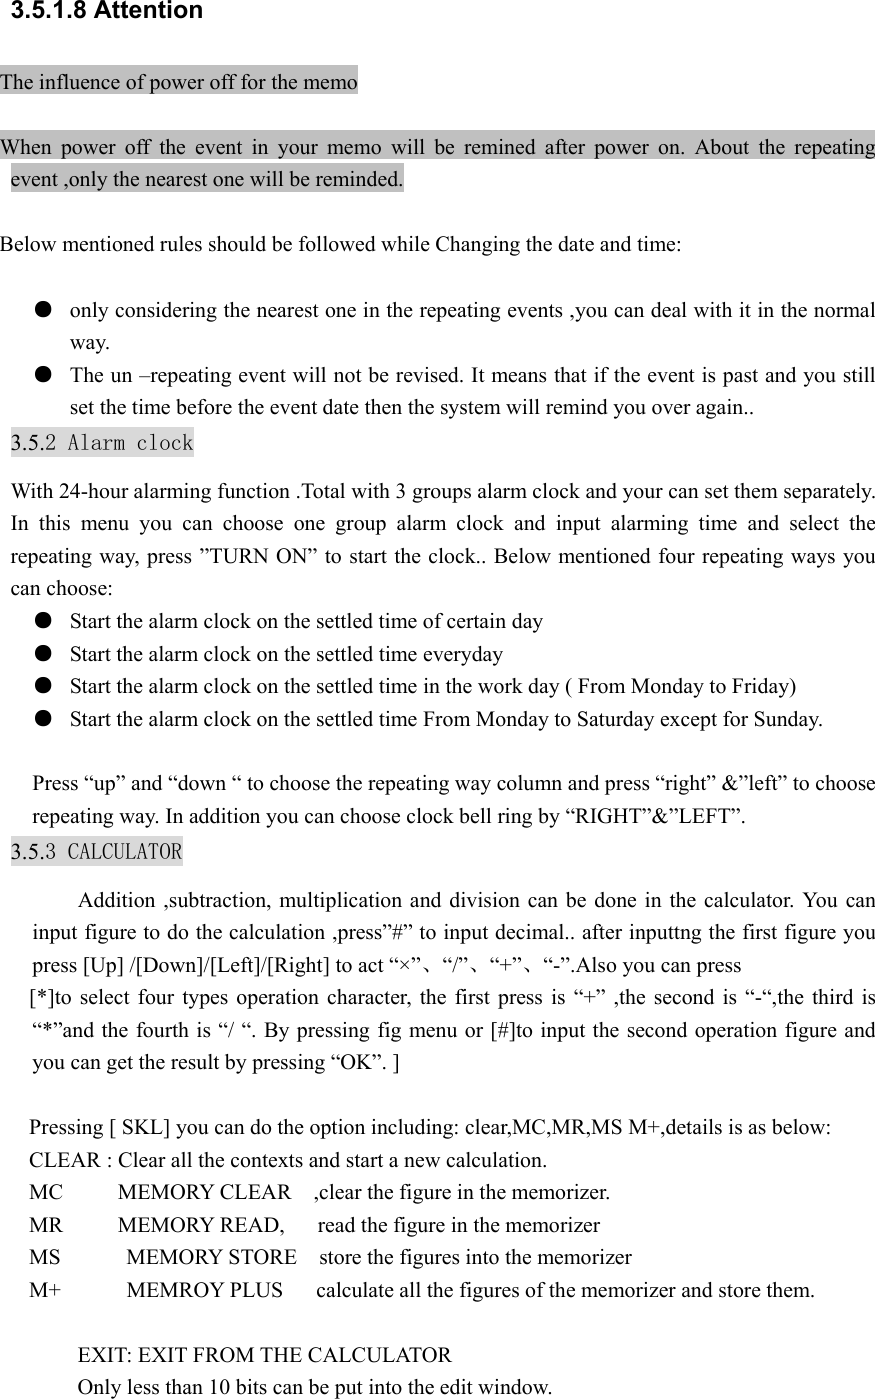 3.5.1.8 Attention The influence of power off for the memo  When power off the event in your memo will be remined after power on. About the repeating event ,only the nearest one will be reminded.  Below mentioned rules should be followed while Changing the date and time:  ● only considering the nearest one in the repeating events ,you can deal with it in the normal way. ● The un –repeating event will not be revised. It means that if the event is past and you still set the time before the event date then the system will remind you over again.. 3.5.2 Alarm clock With 24-hour alarming function .Total with 3 groups alarm clock and your can set them separately. In this menu you can choose one group alarm clock and input alarming time and select the repeating way, press ”TURN ON” to start the clock.. Below mentioned four repeating ways you can choose: ● Start the alarm clock on the settled time of certain day ● Start the alarm clock on the settled time everyday ● Start the alarm clock on the settled time in the work day ( From Monday to Friday) ● Start the alarm clock on the settled time From Monday to Saturday except for Sunday.  Press “up” and “down “ to choose the repeating way column and press “right” &amp;”left” to choose repeating way. In addition you can choose clock bell ring by “RIGHT”&amp;”LEFT”. 3.5.3 CALCULATOR Addition ,subtraction, multiplication and division can be done in the calculator. You can input figure to do the calculation ,press”#” to input decimal.. after inputtng the first figure you press [Up] /[Down]/[Left]/[Right] to act “×”、“/”、“+”、“-”.Also you can press [*]to select four types operation character, the first press is “+” ,the second is “-“,the third is “*”and the fourth is “/ “. By pressing fig menu or [#]to input the second operation figure and you can get the result by pressing “OK”. ]  Pressing [ SKL] you can do the option including: clear,MC,MR,MS M+,details is as below: CLEAR : Clear all the contexts and start a new calculation. MC     MEMORY CLEAR  ,clear the figure in the memorizer. MR     MEMORY READ,   read the figure in the memorizer MS      MEMORY STORE  store the figures into the memorizer M+            MEMROY PLUS      calculate all the figures of the memorizer and store them.  EXIT: EXIT FROM THE CALCULATOR Only less than 10 bits can be put into the edit window.  